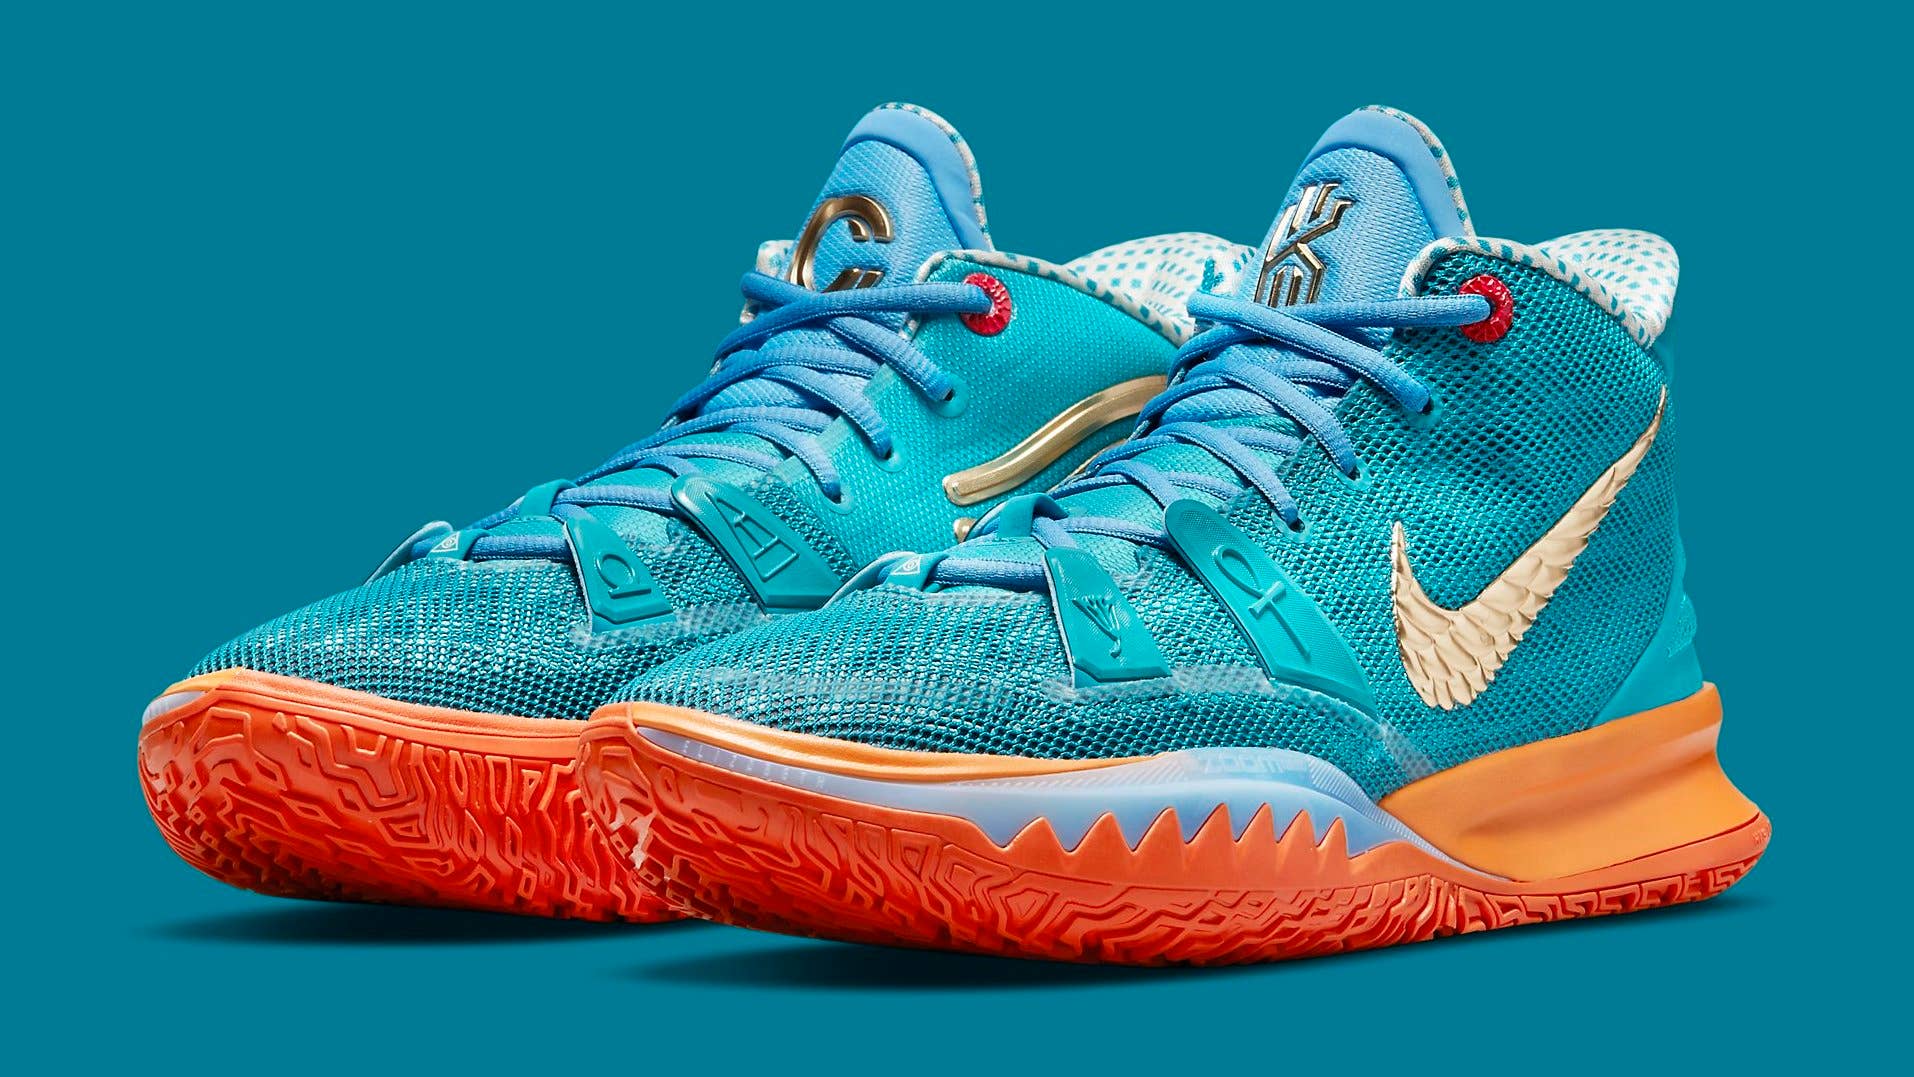 Concepts x Nike Kyrie 7 CT1137 900 Pair